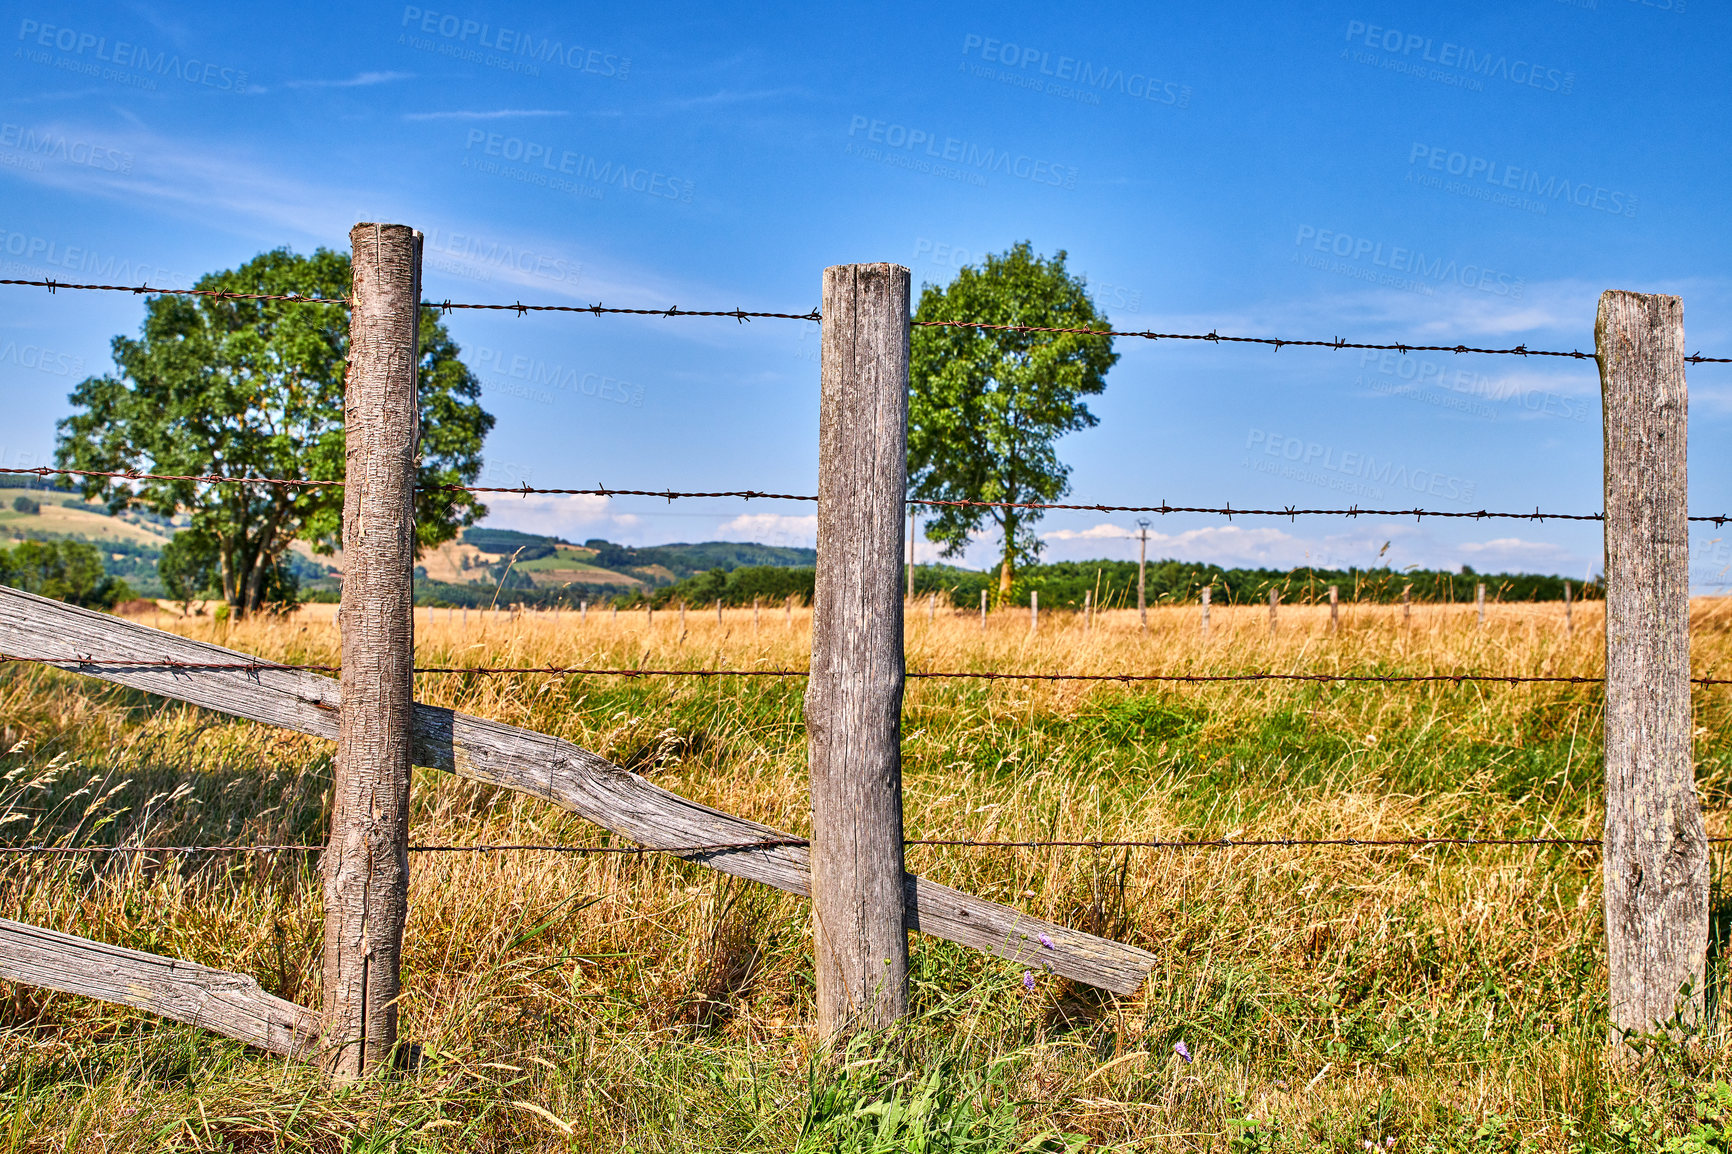 Buy stock photo Farming agriculture field with copy space on blue sky. Overgrown grass in fenced isolated farming area. Farm with lush trees and yellow and green grass looks beautiful in the rural countryside nature